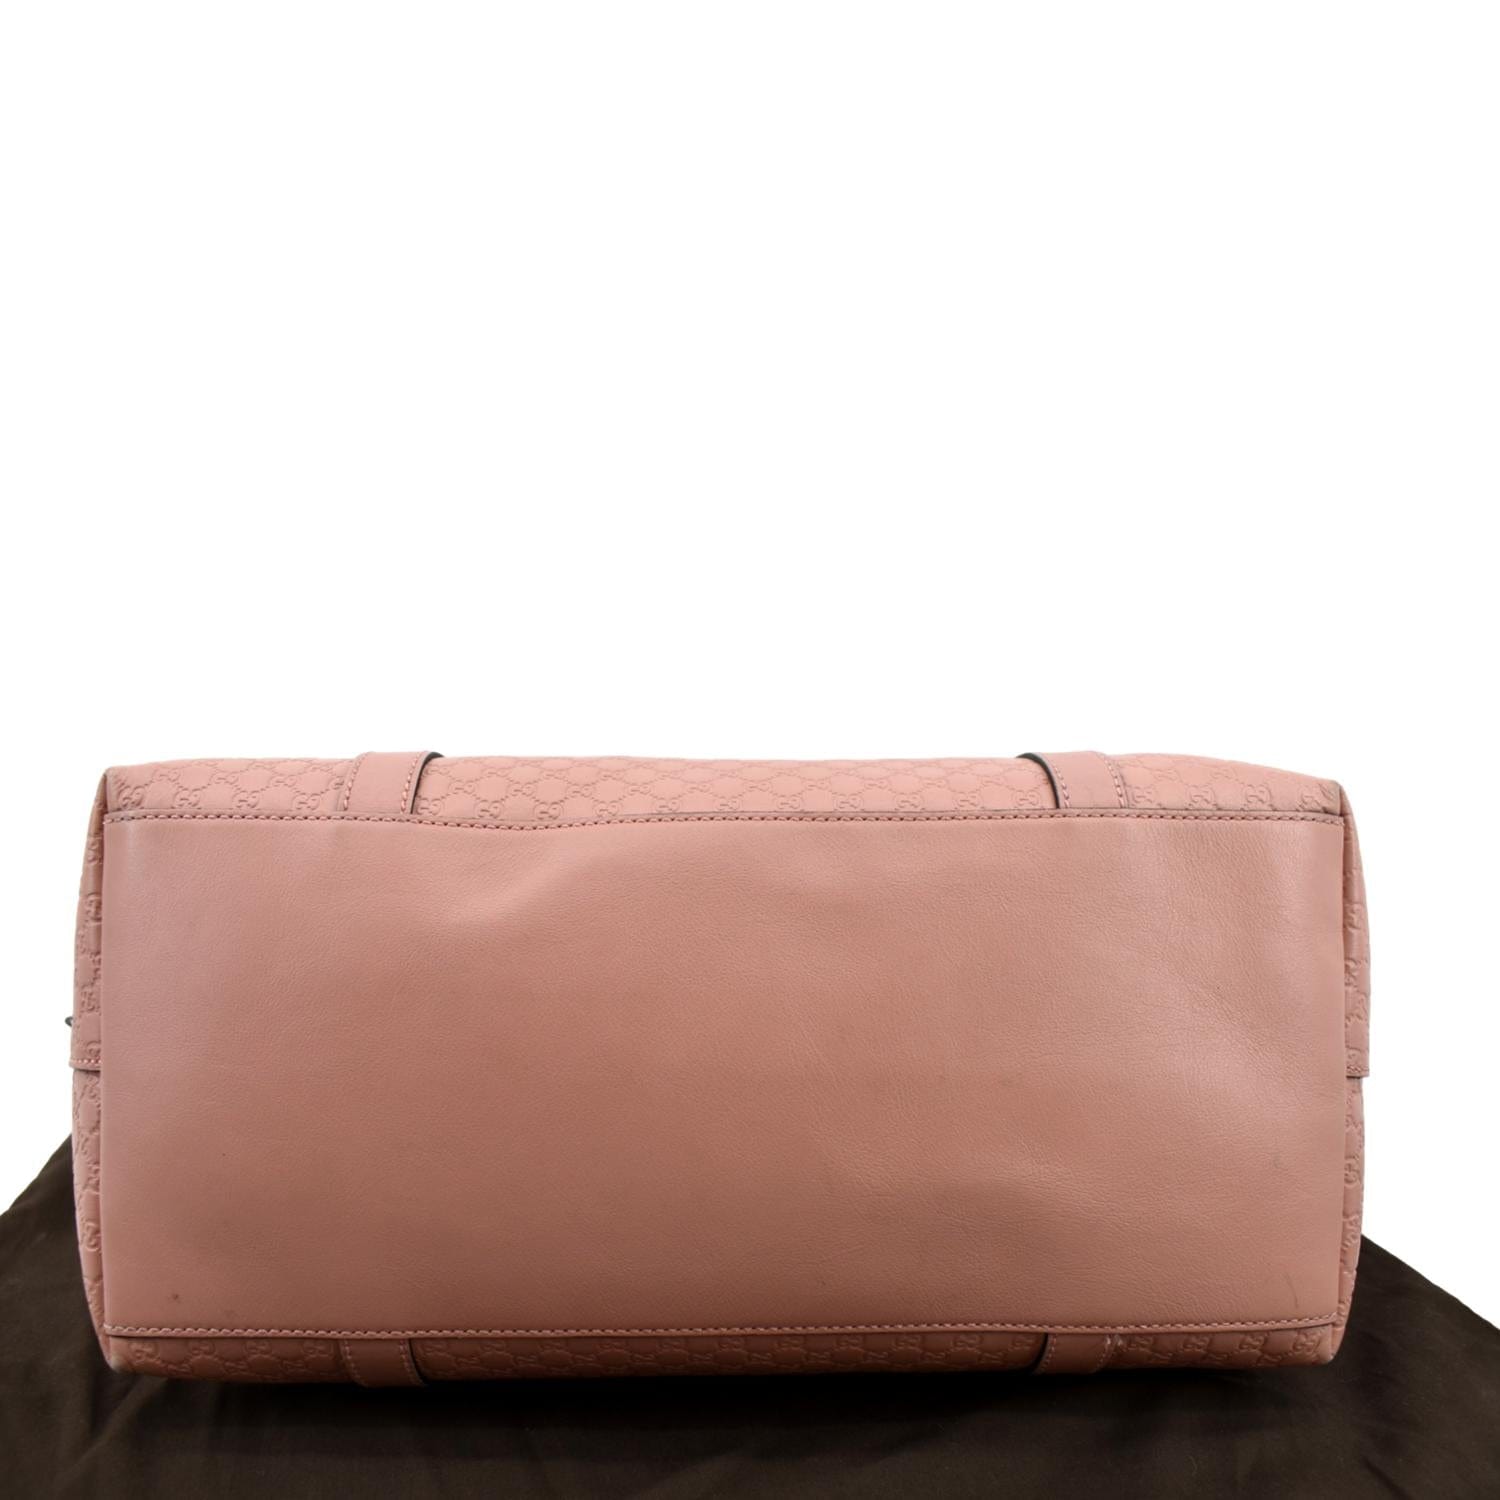 Gucci Pink Soft Leather Microguccissima Monogram Large Dome